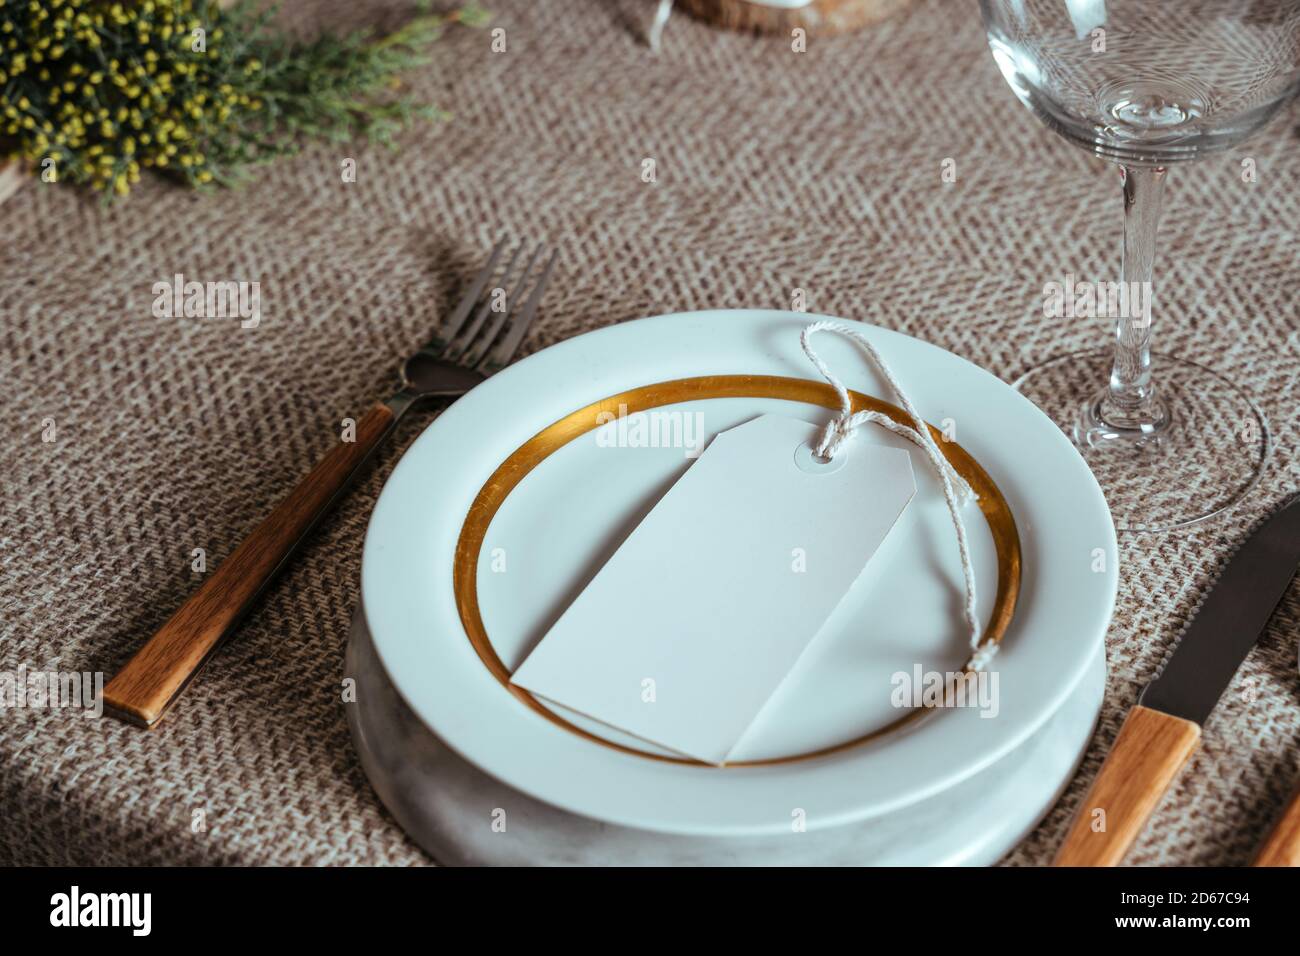 10 Natural Christmas Place Settings – She Keeps a Lovely Home